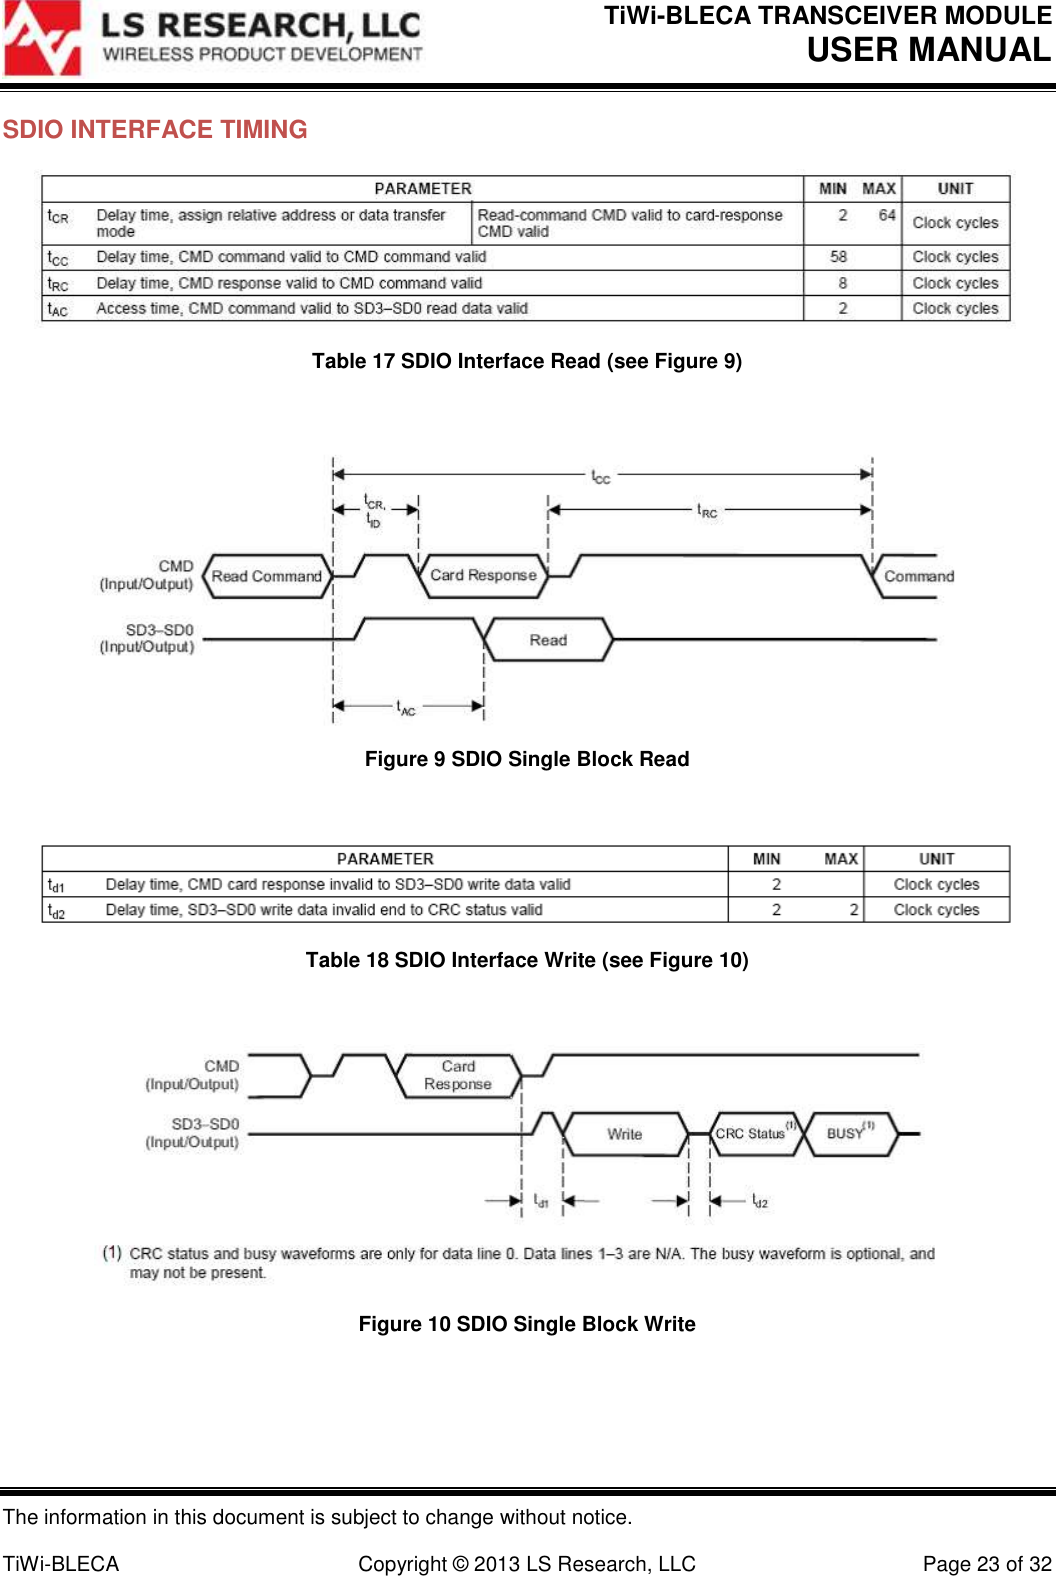 TiWi-BLECA TRANSCEIVER MODULE USER MANUAL   The information in this document is subject to change without notice.  TiWi-BLECA  Copyright © 2013 LS Research, LLC  Page 23 of 32 SDIO INTERFACE TIMING  Table 17 SDIO Interface Read (see Figure 9)   Figure 9 SDIO Single Block Read   Table 18 SDIO Interface Write (see Figure 10)   Figure 10 SDIO Single Block Write  